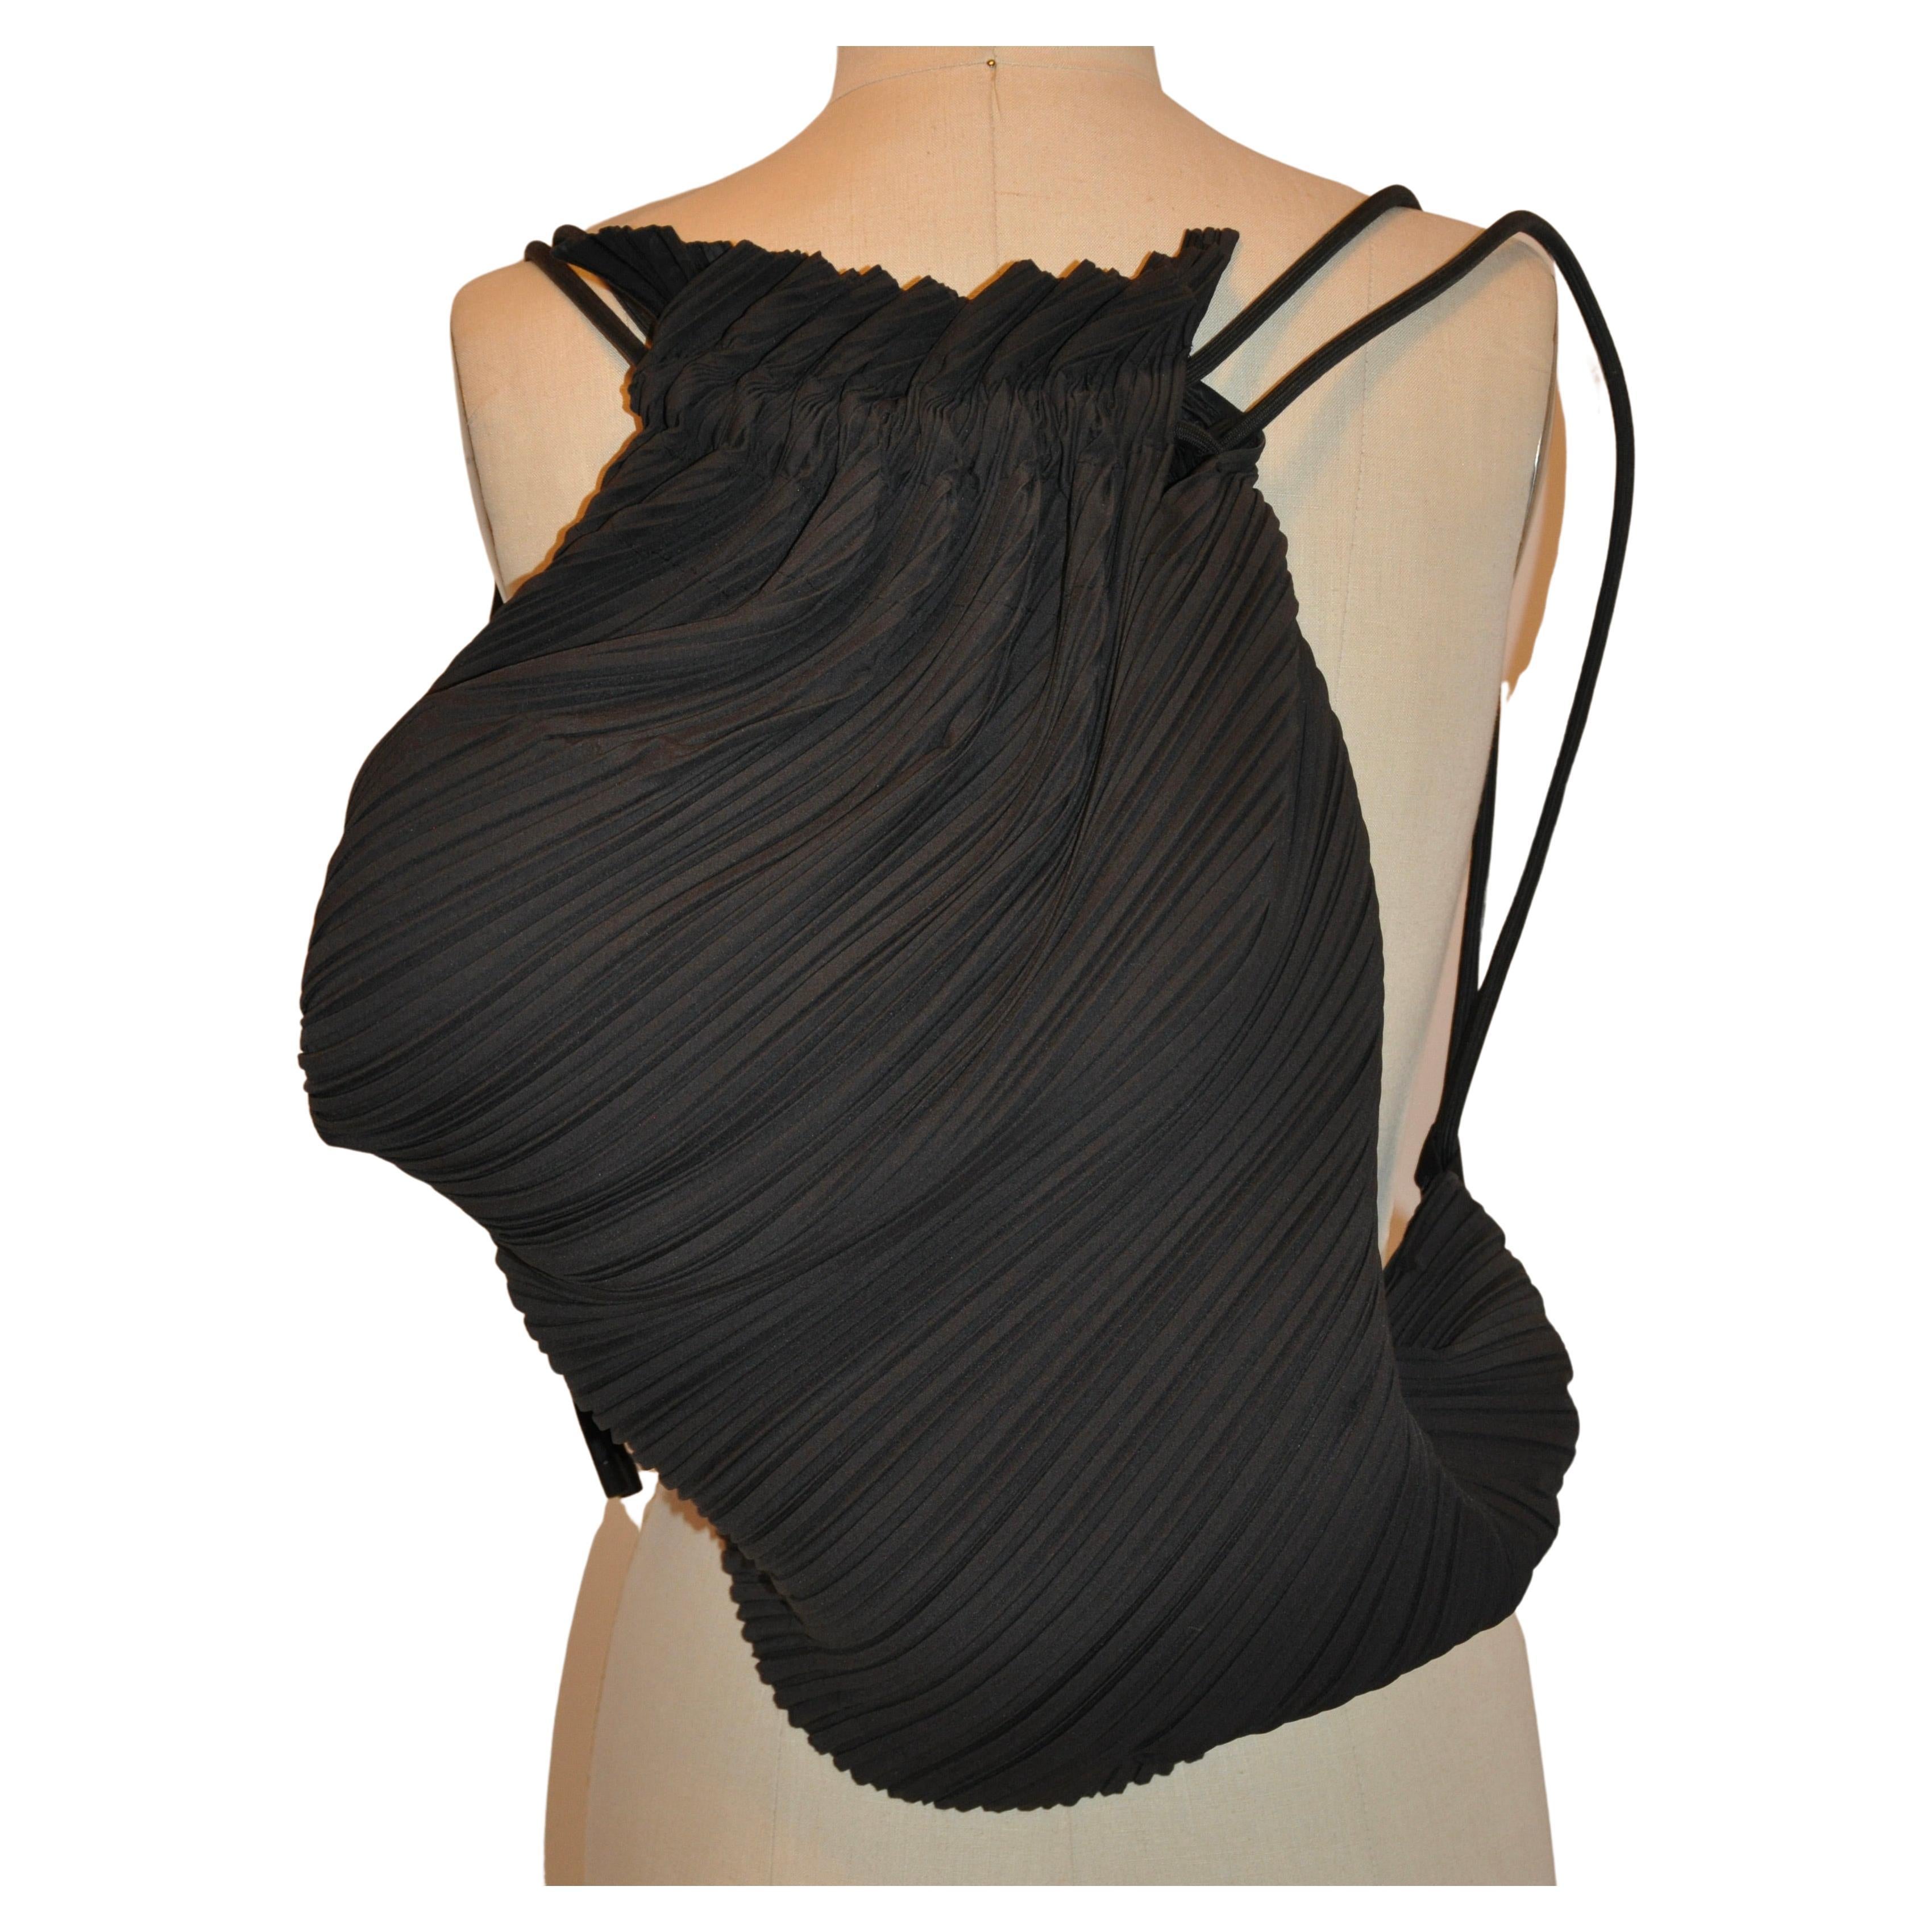 Extremely Rare Issey Miyake "Limited Edition" Asymmetric Large Black Drawstring For Sale